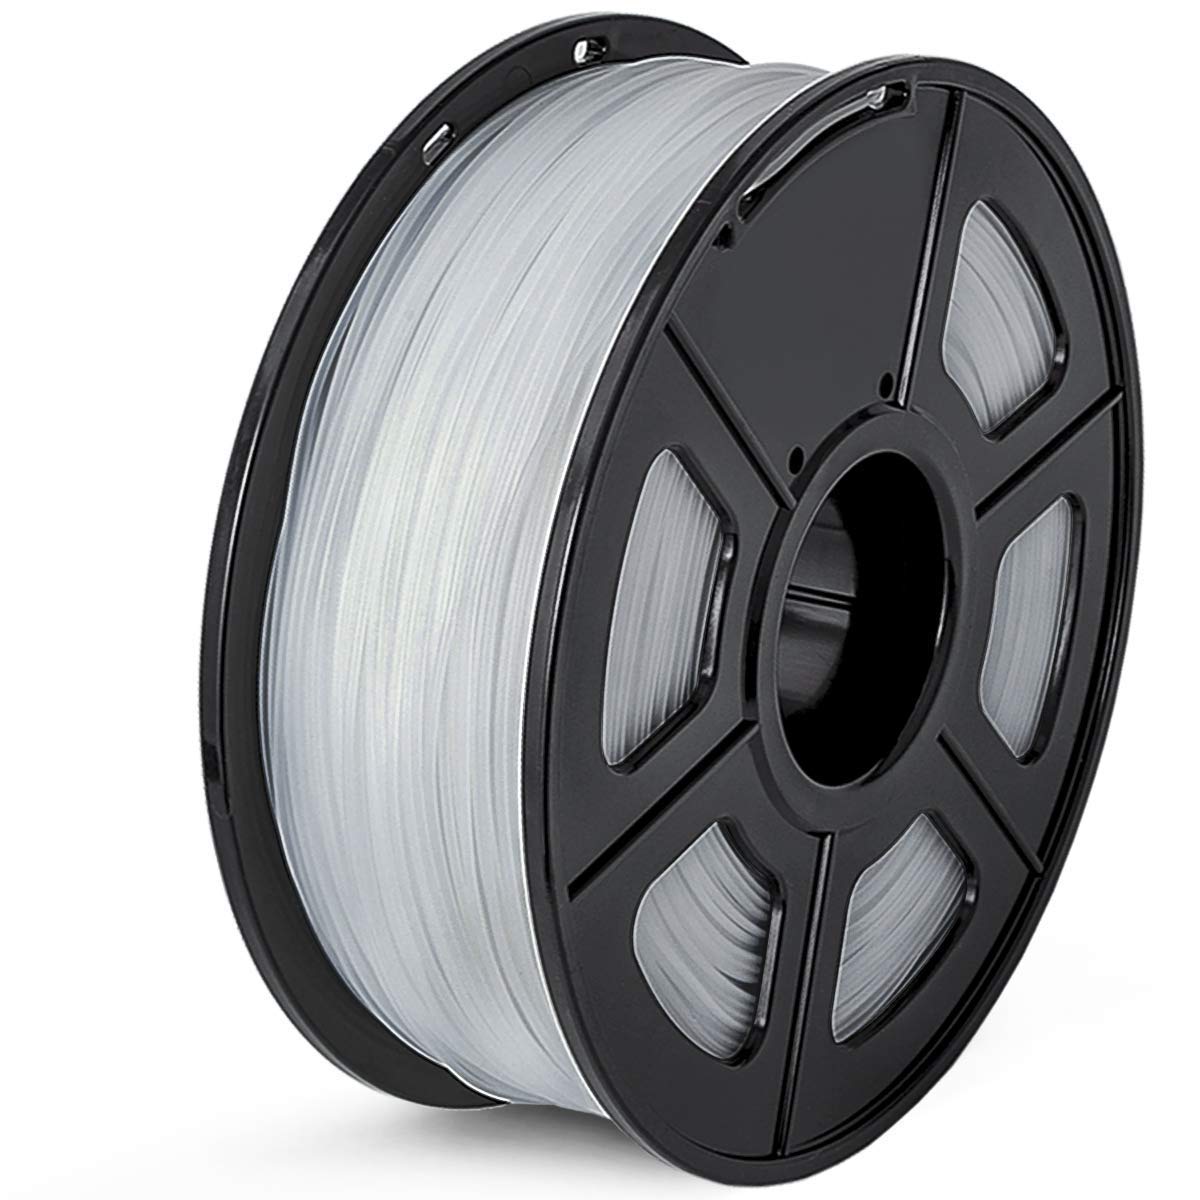 Transparent ABS 3D Printer Filament 1.75mm 1Kg Spool (2.2lbs), Dimensional Accuracy of +/- 0.02mm